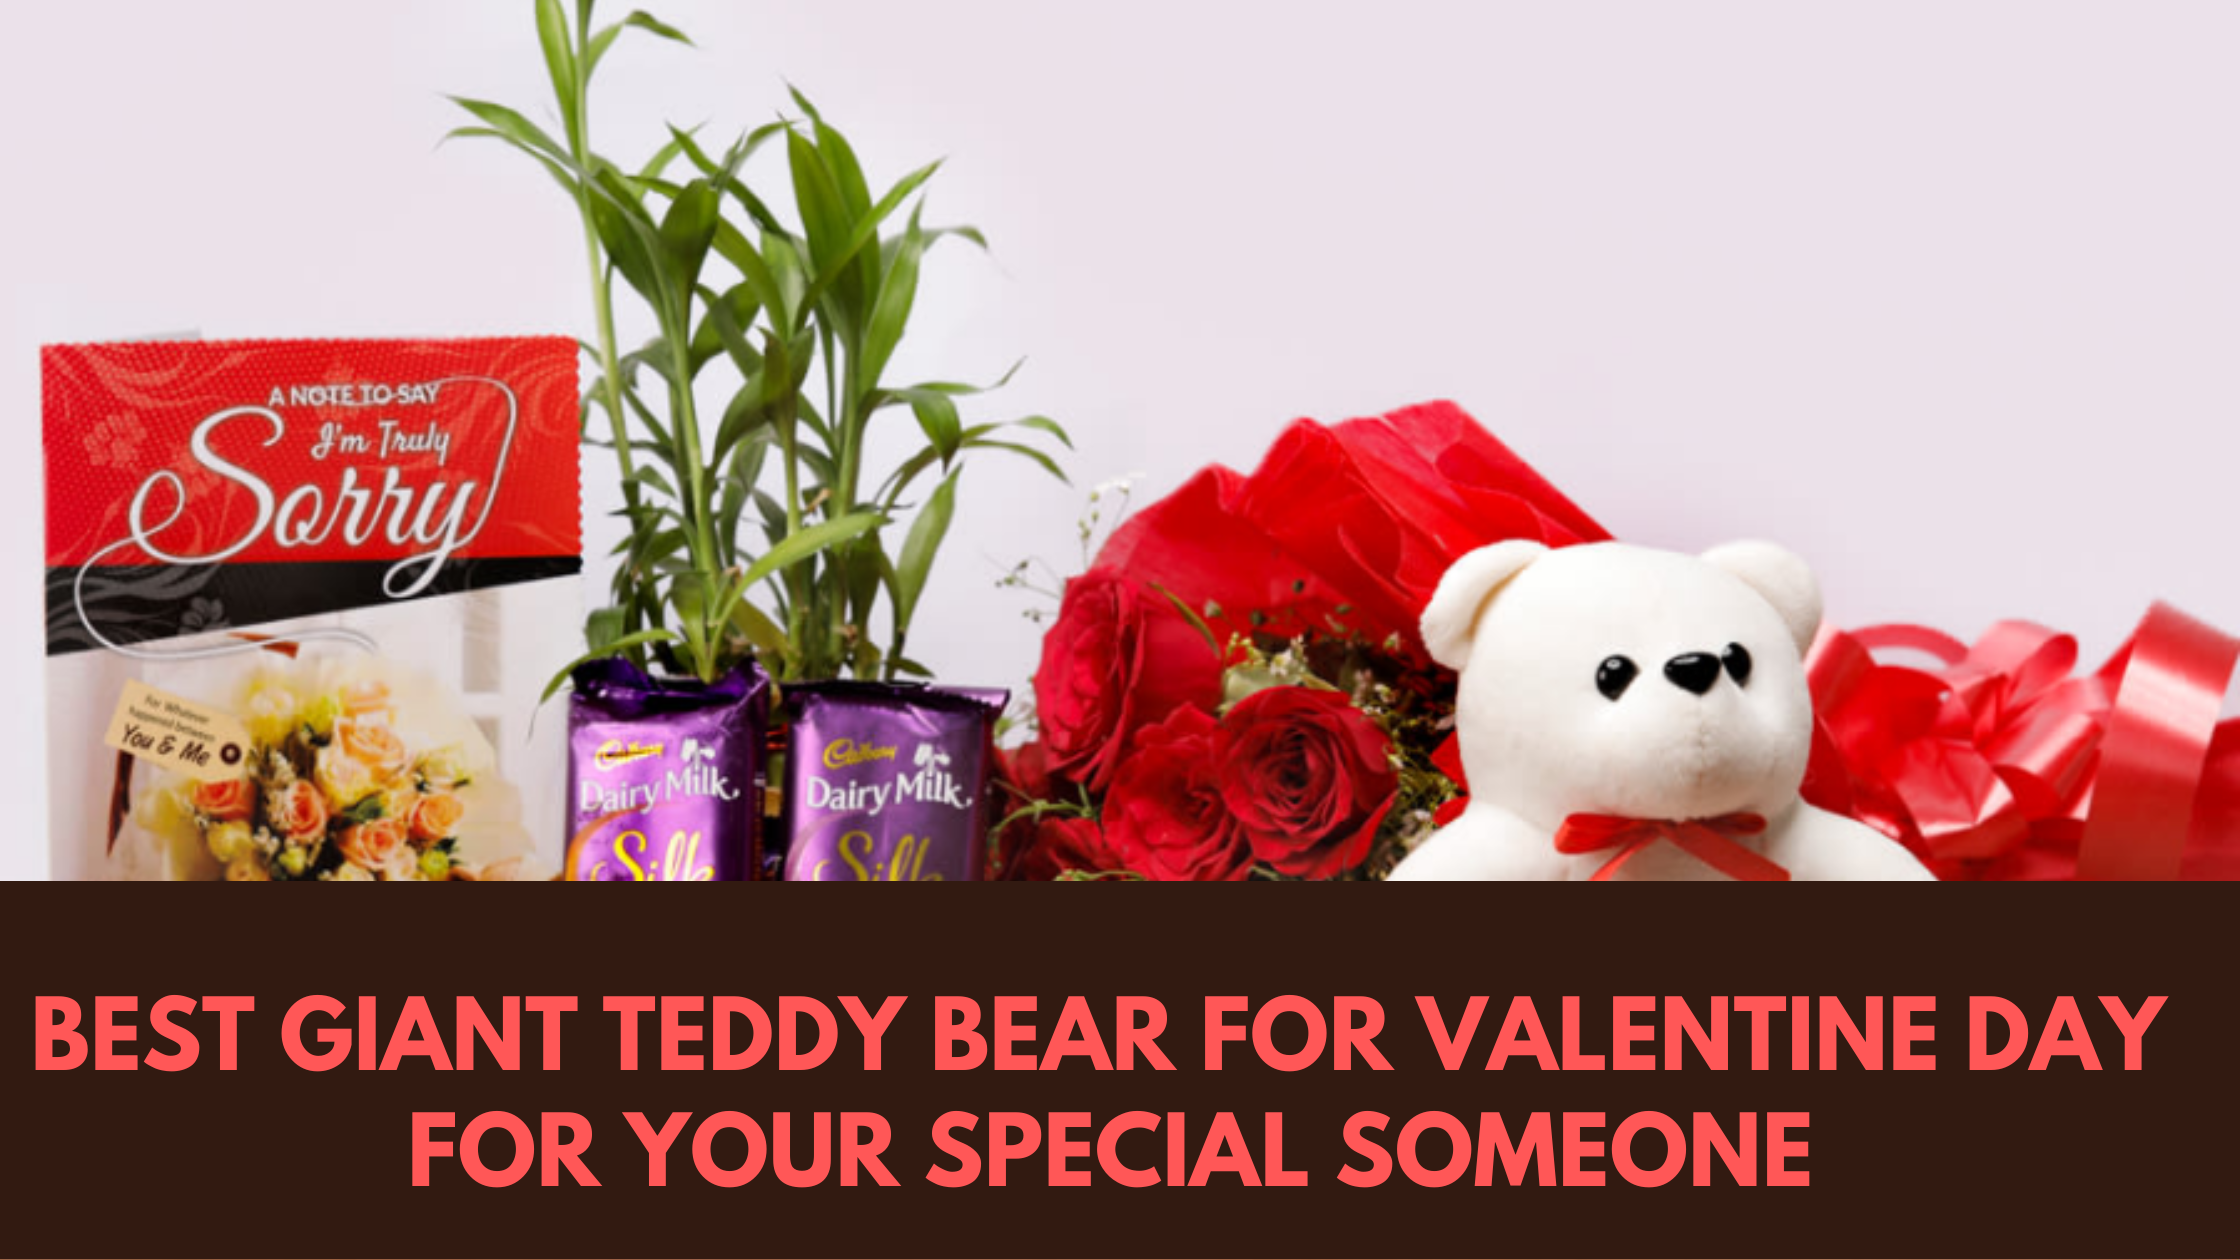 Best Giant Teddy Bear For Valentine Day For Your Special Someone